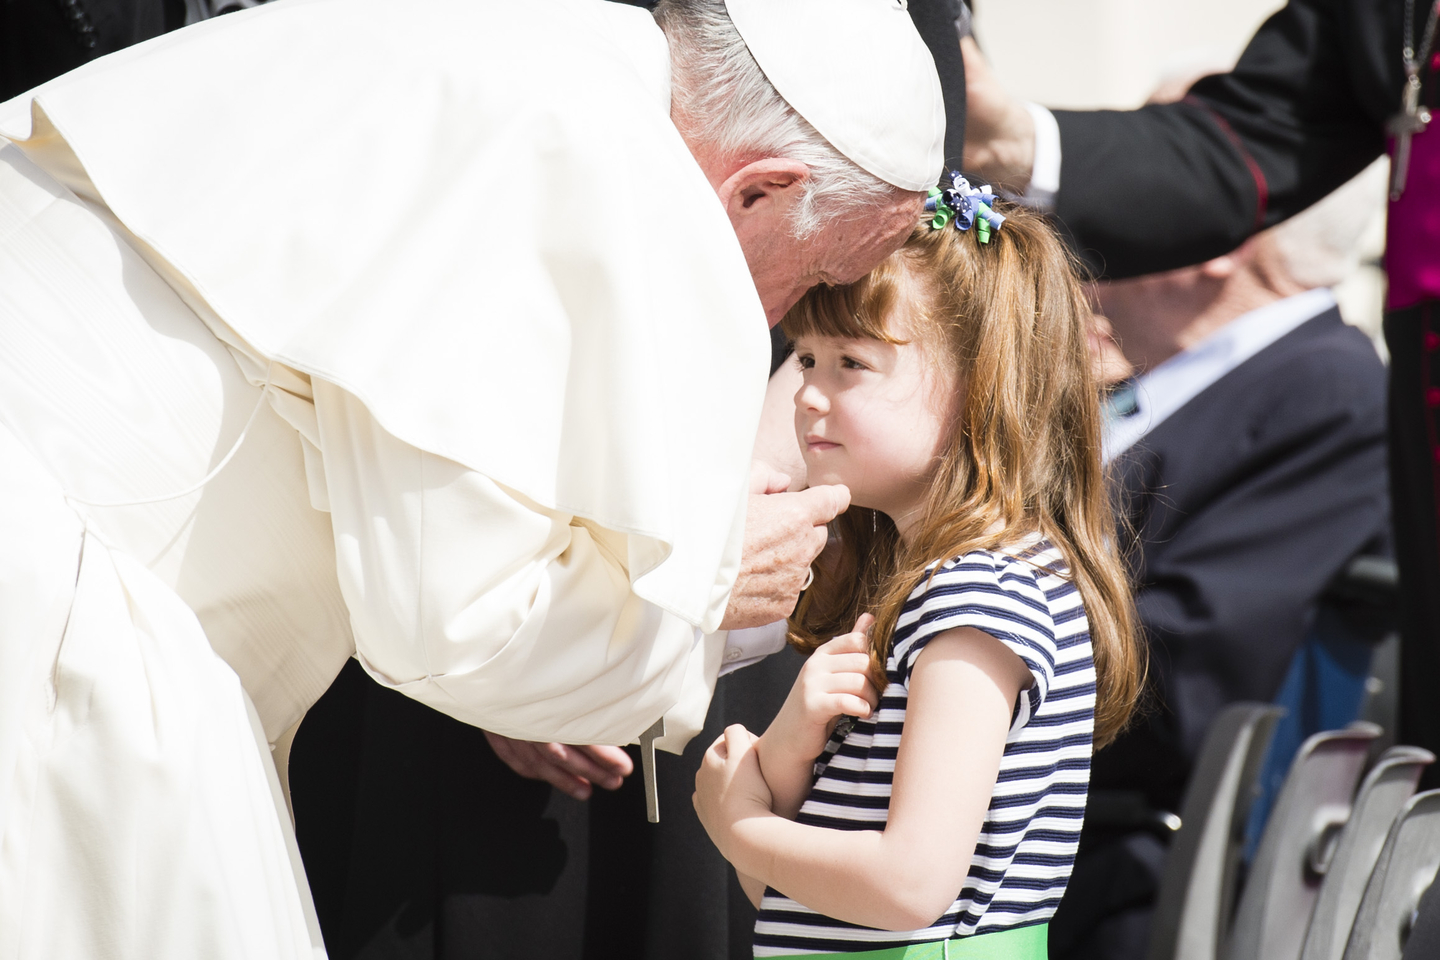 Pope Francis General Audience April 06, 2016